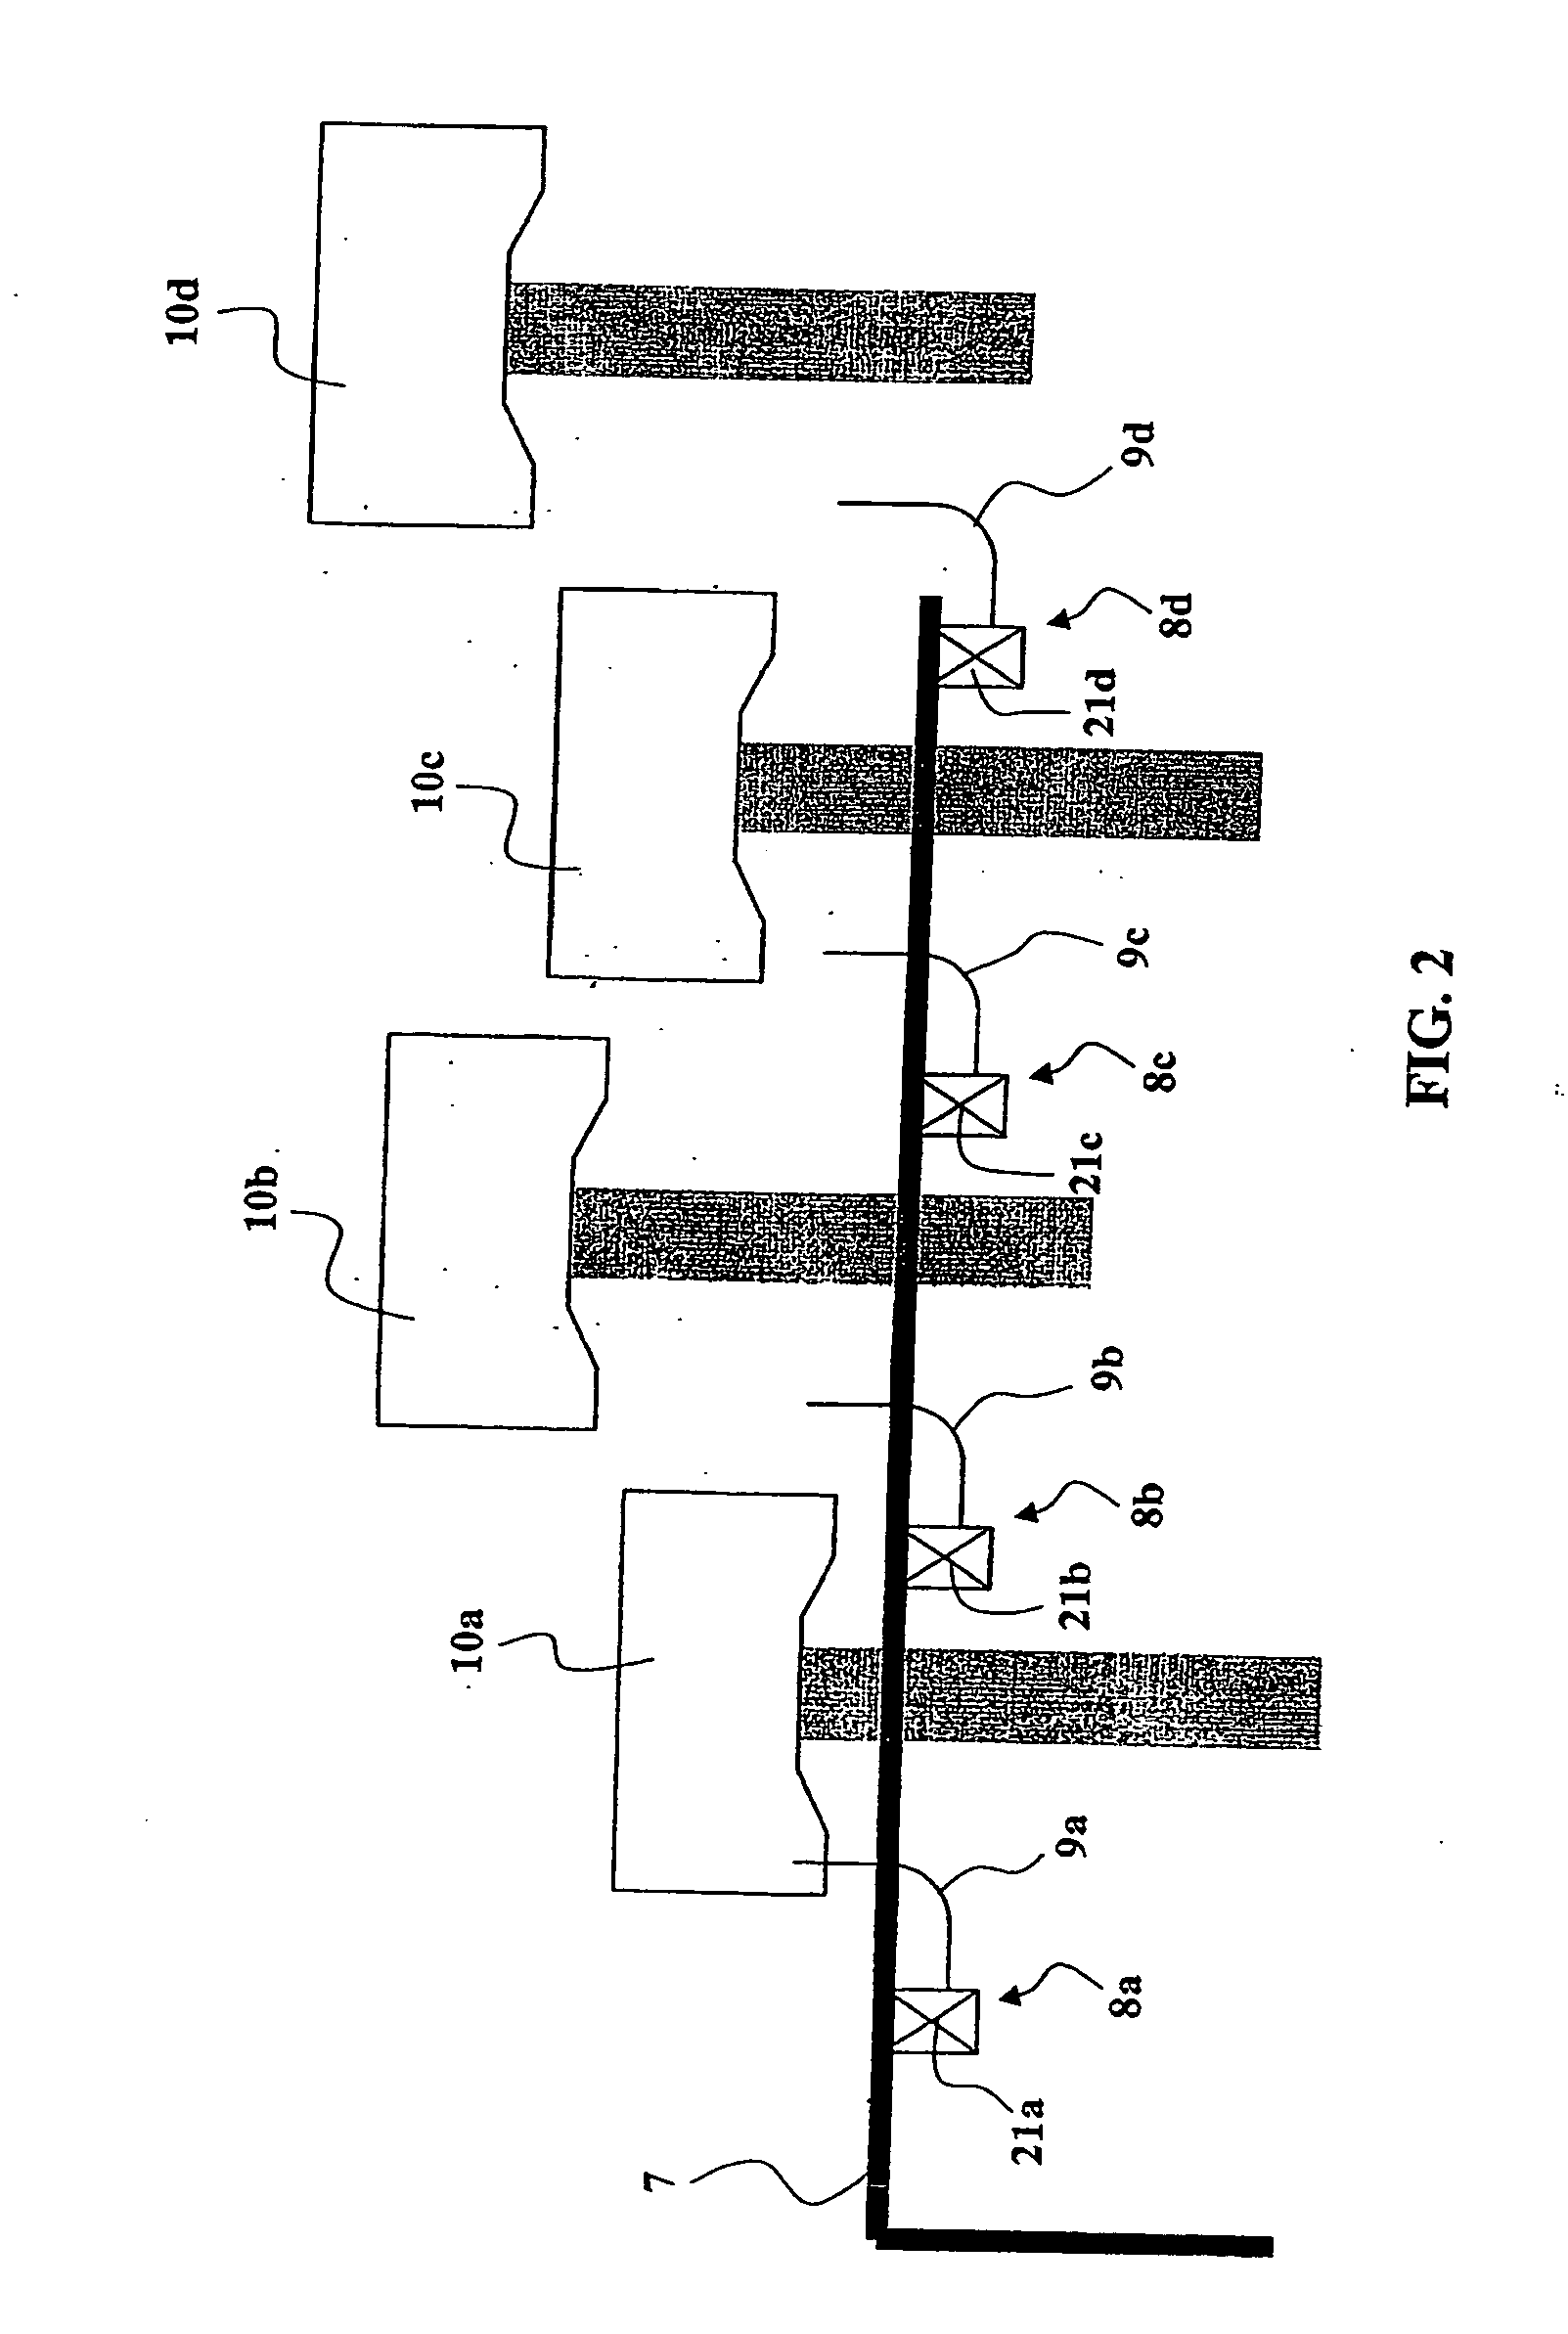 Controlled leakage valve for piston cooling nozzle